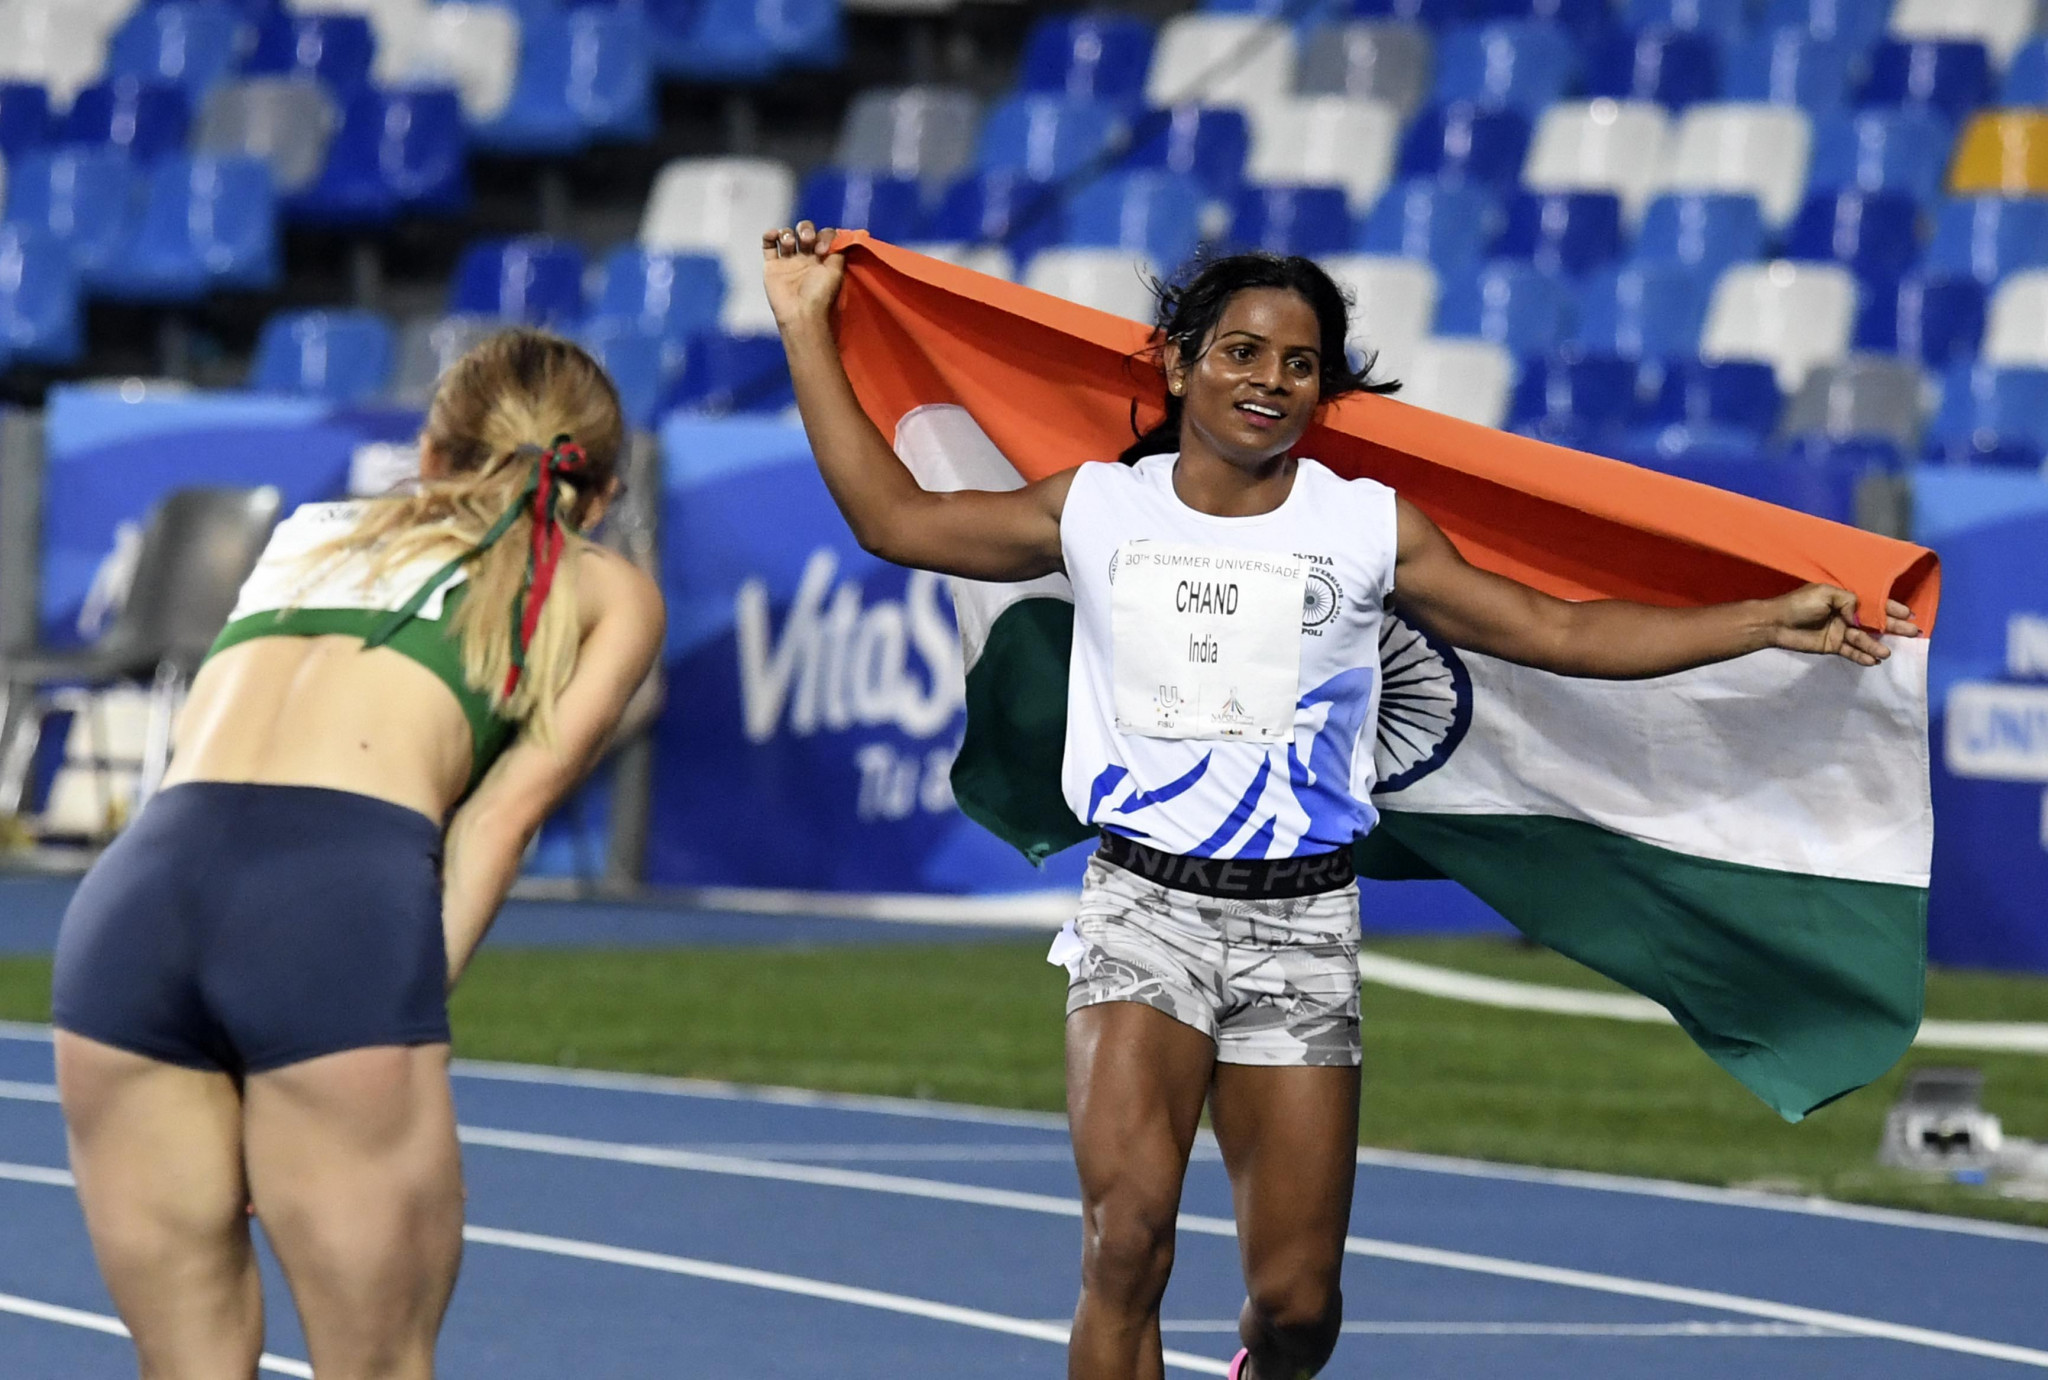  Chand races away from controversy as she powers to 100m glory at Naples 2019